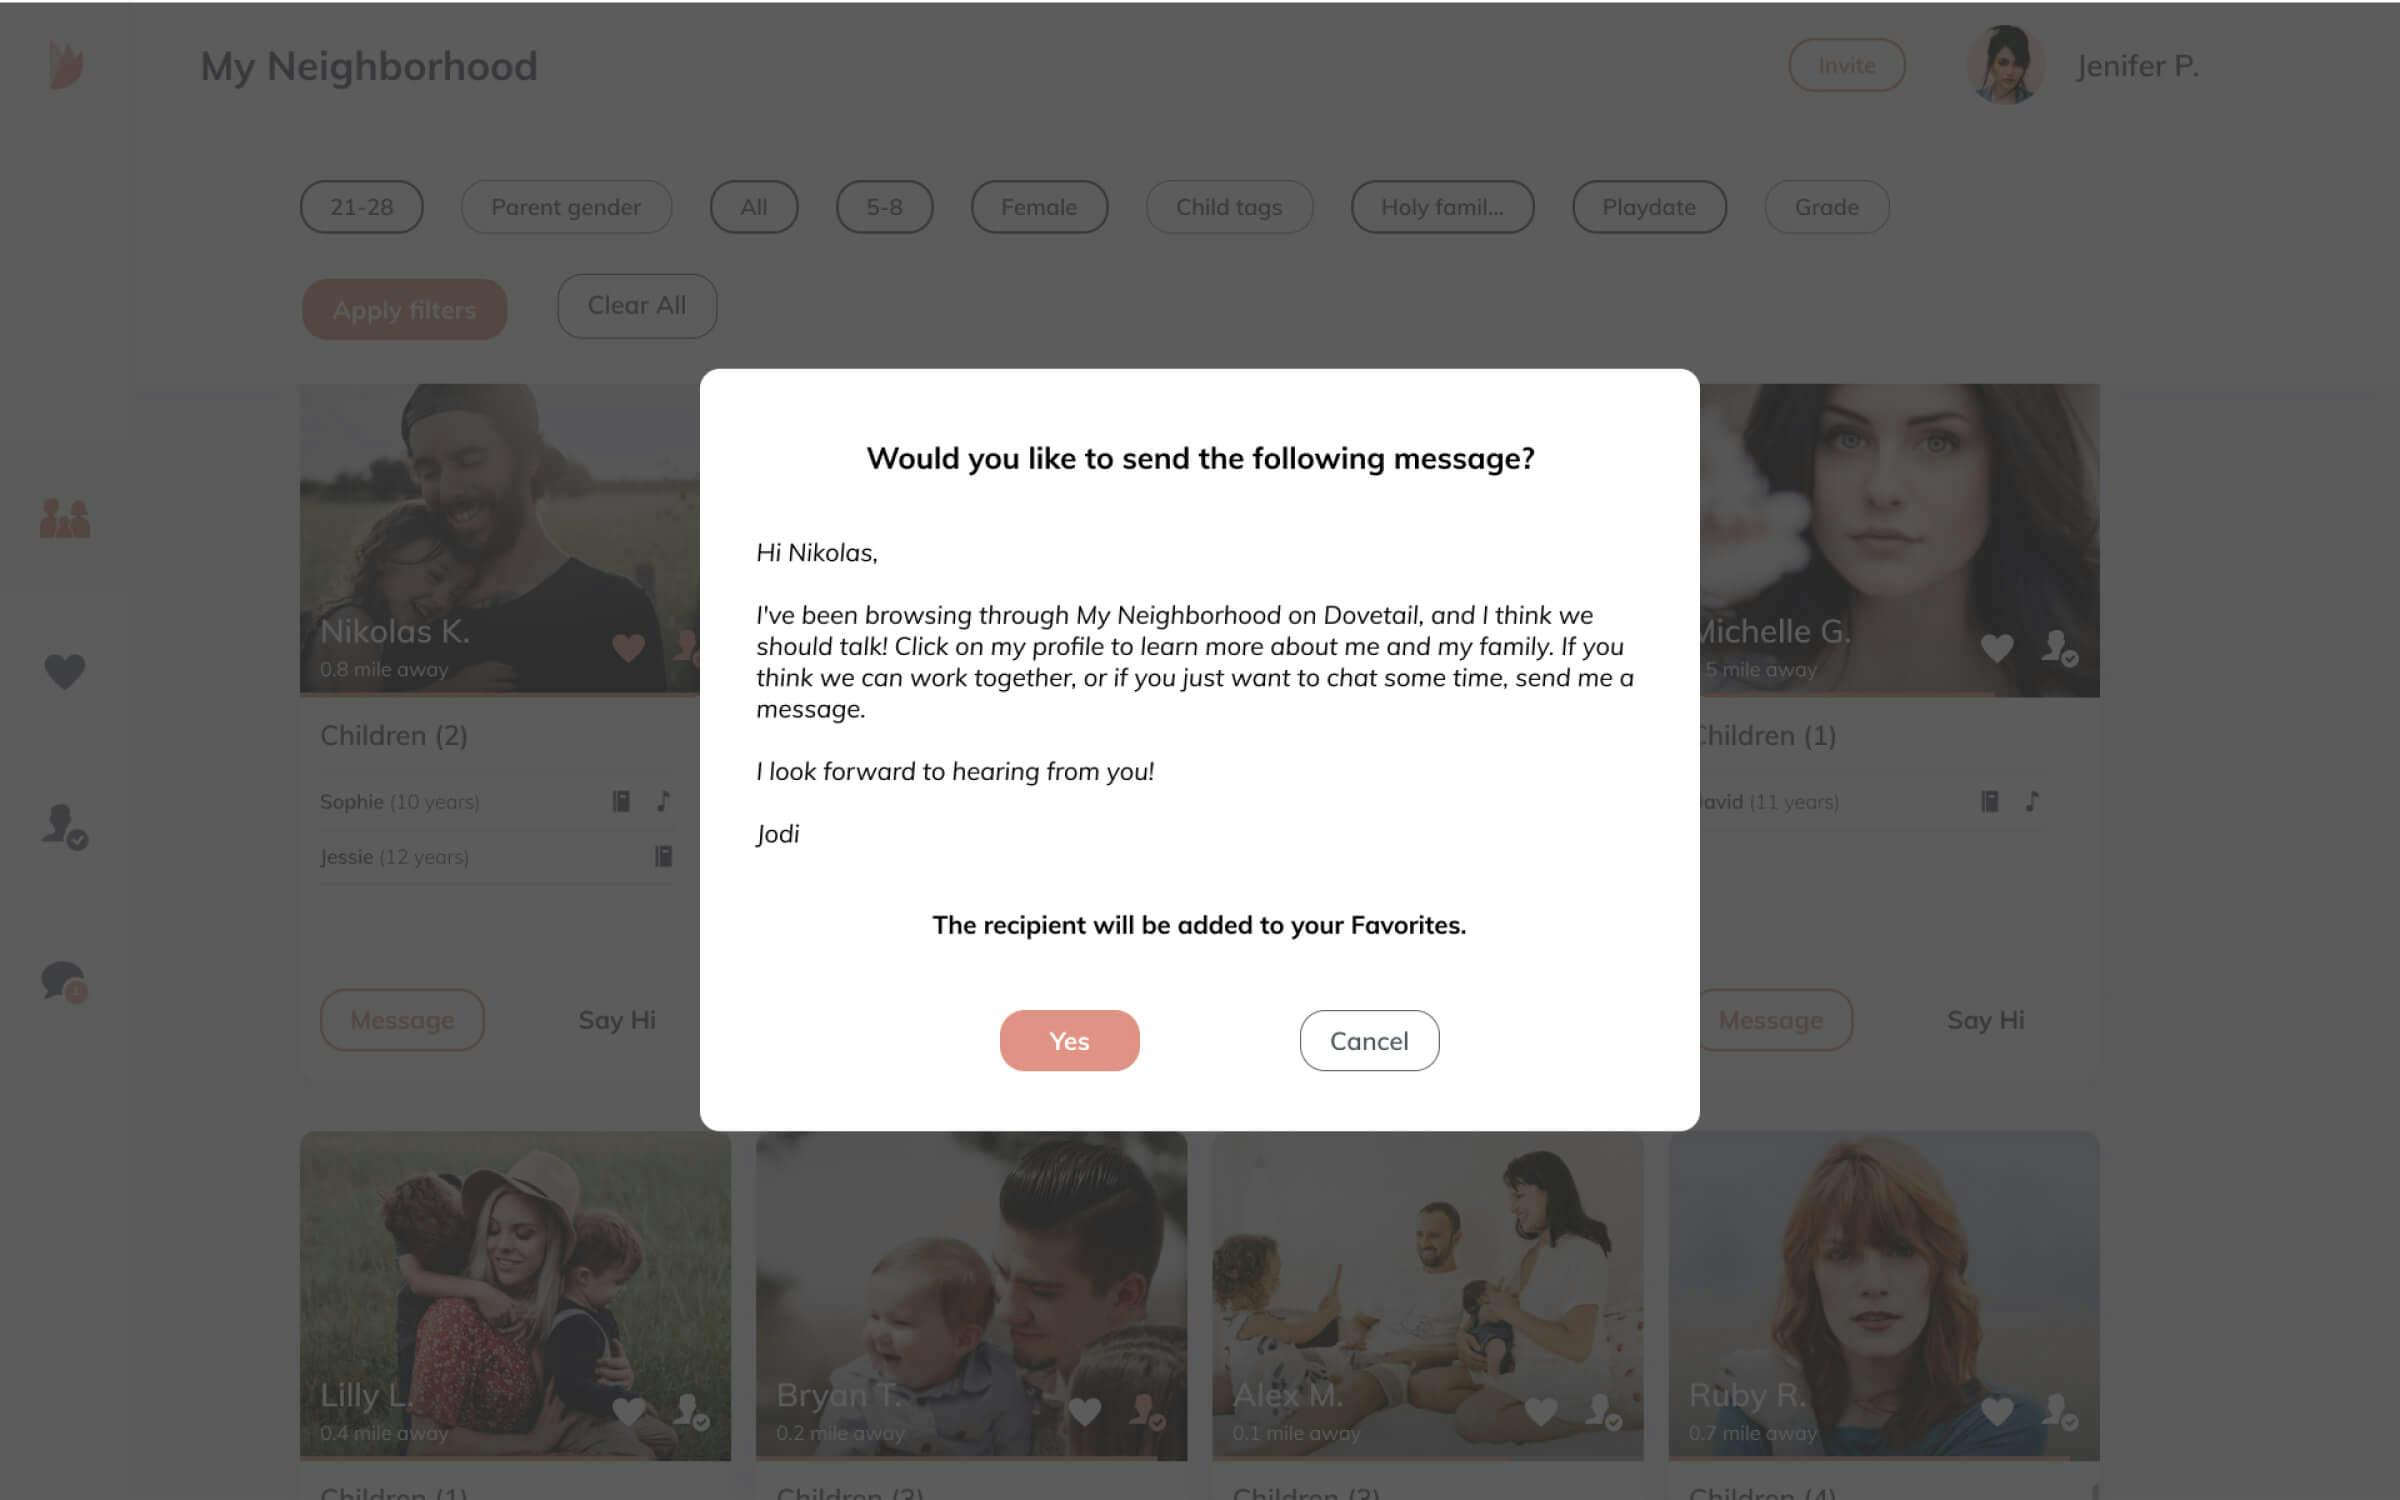 Pop-up confirmation of sending a message to the chat